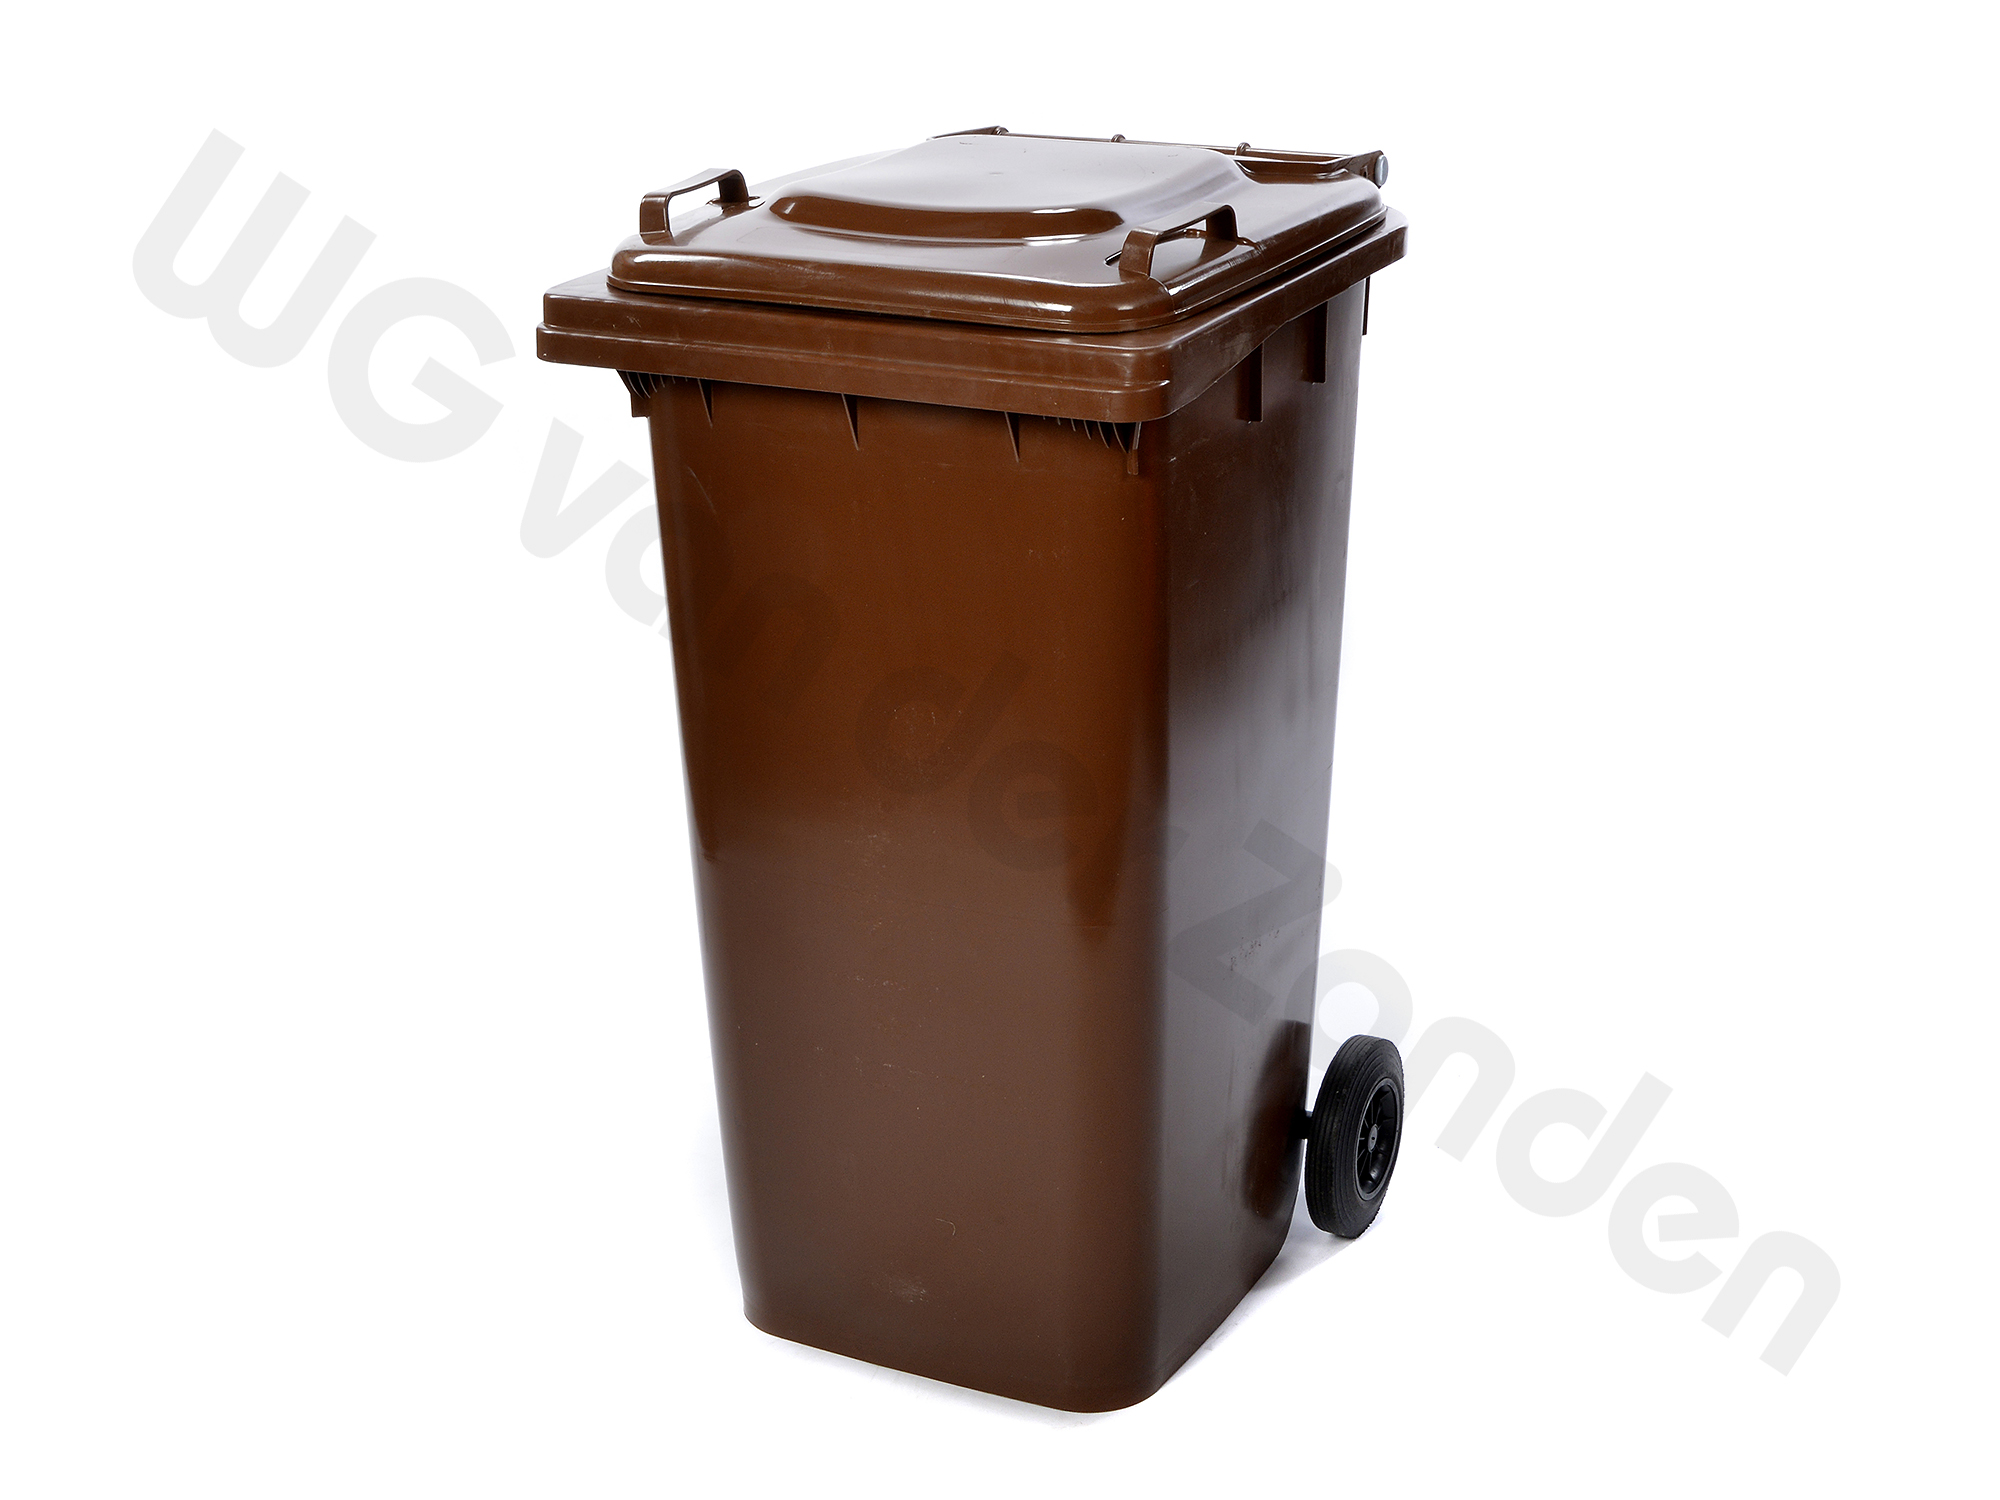 440342 GARBAGE CONTAINER 240 LTR PLASTIC TWO WHEELED BROWN